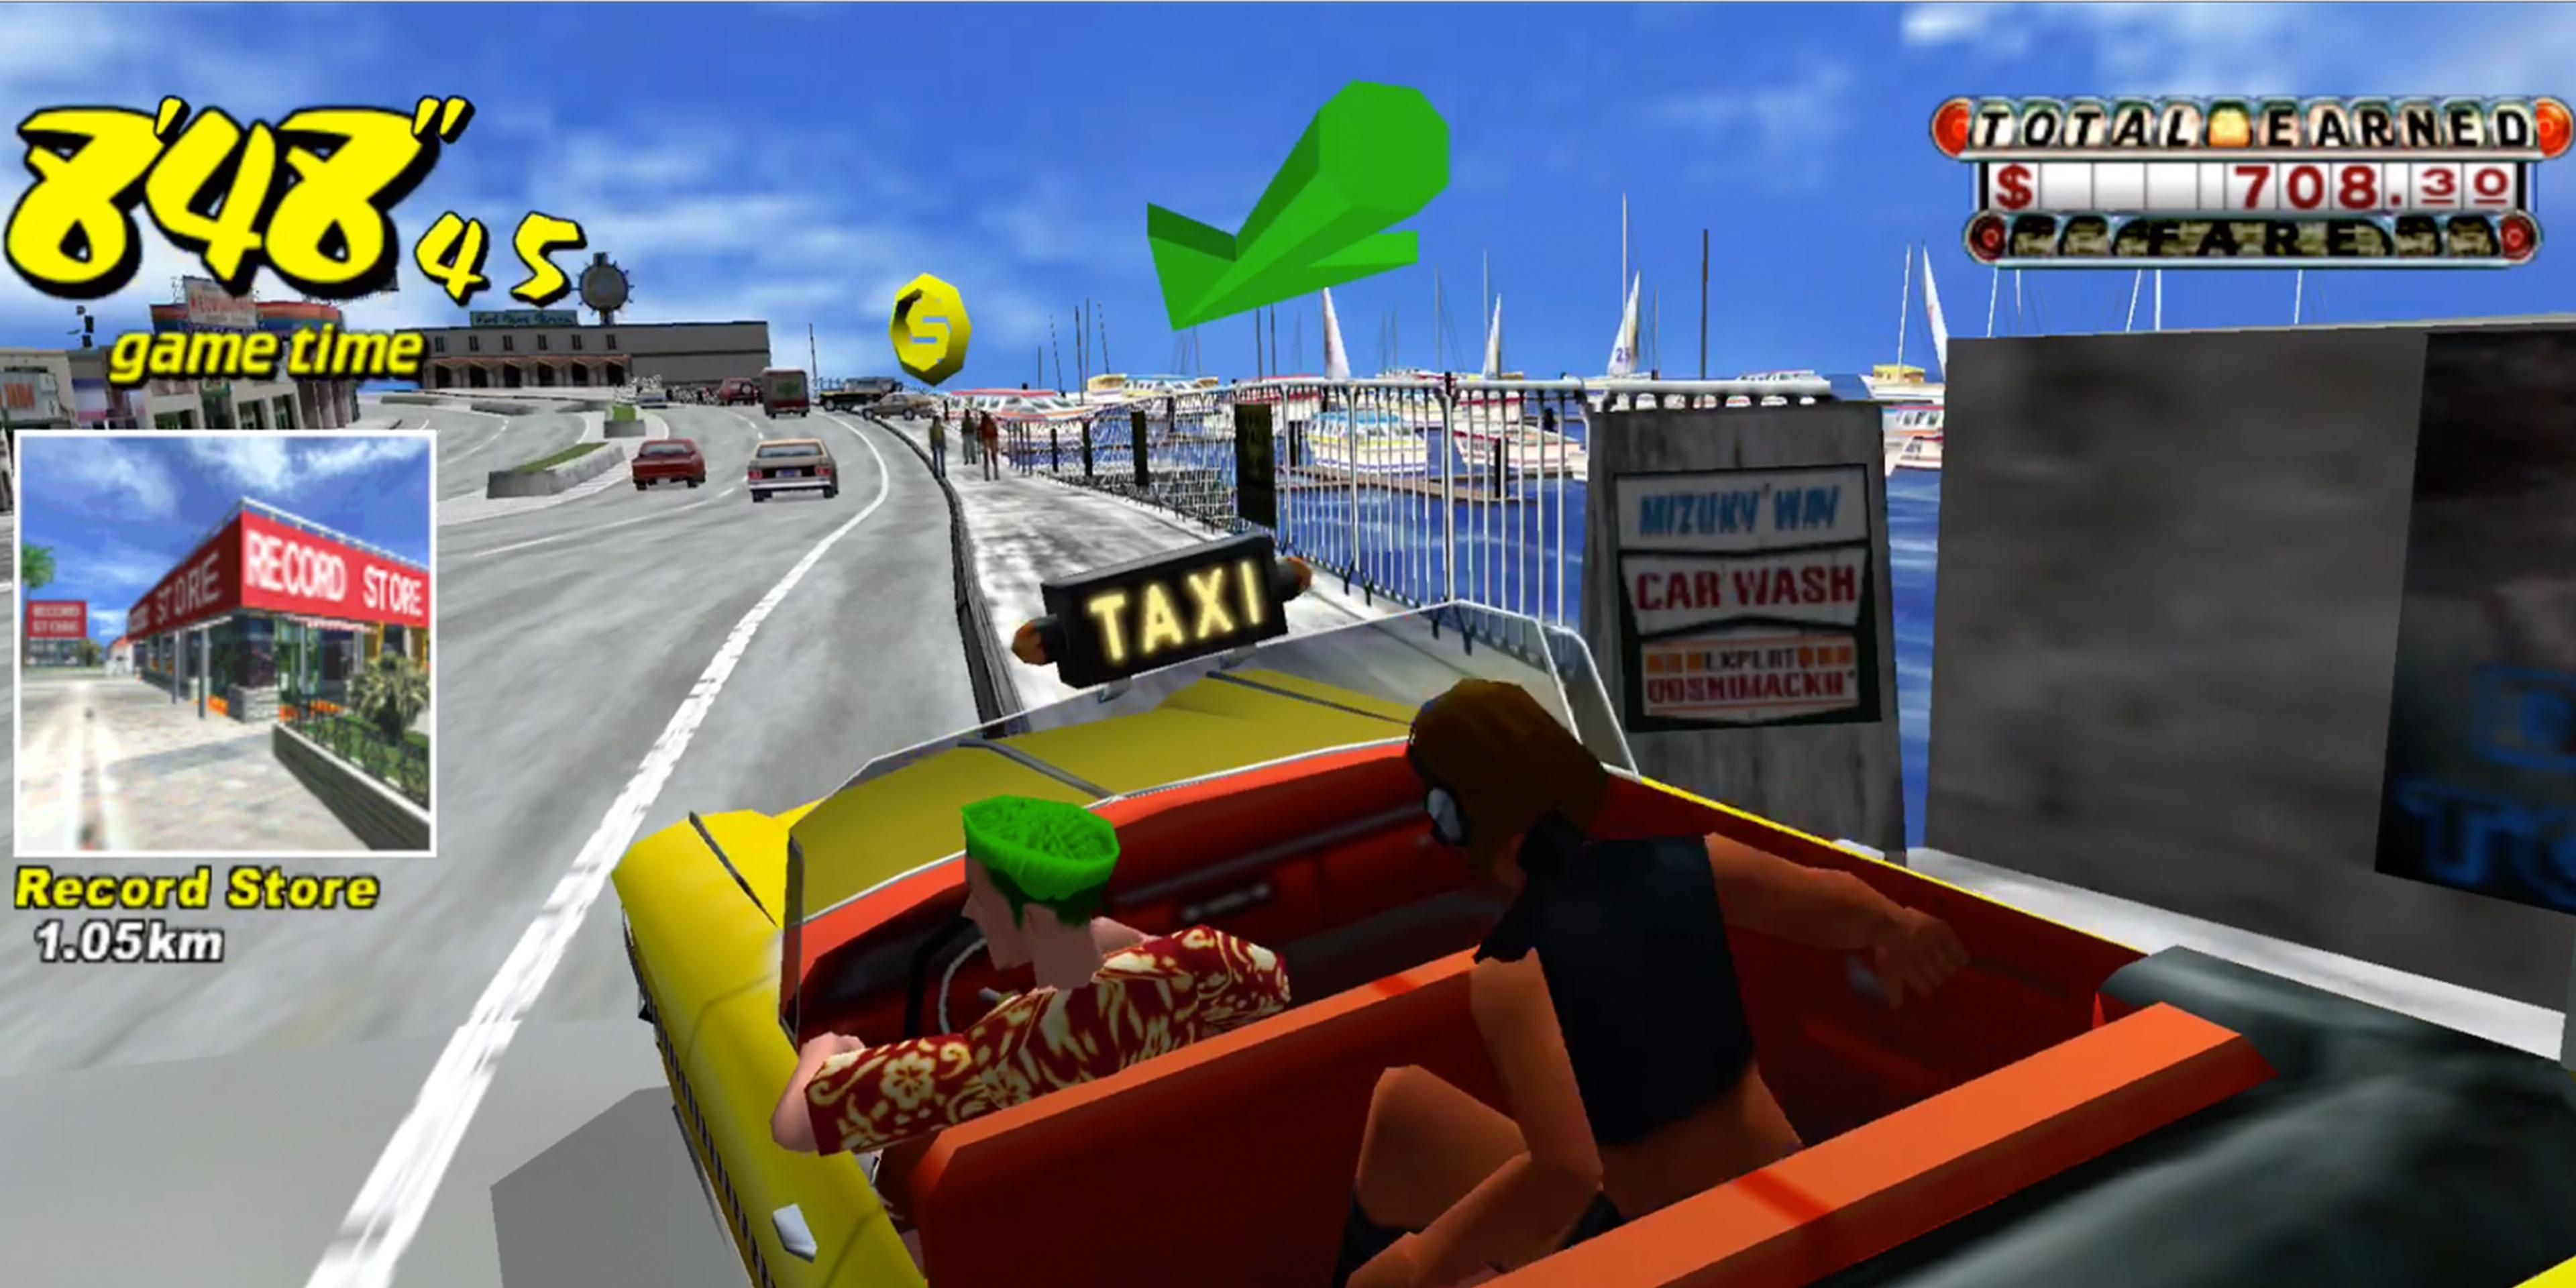 Taking customers to the Record Store in Crazy Taxi